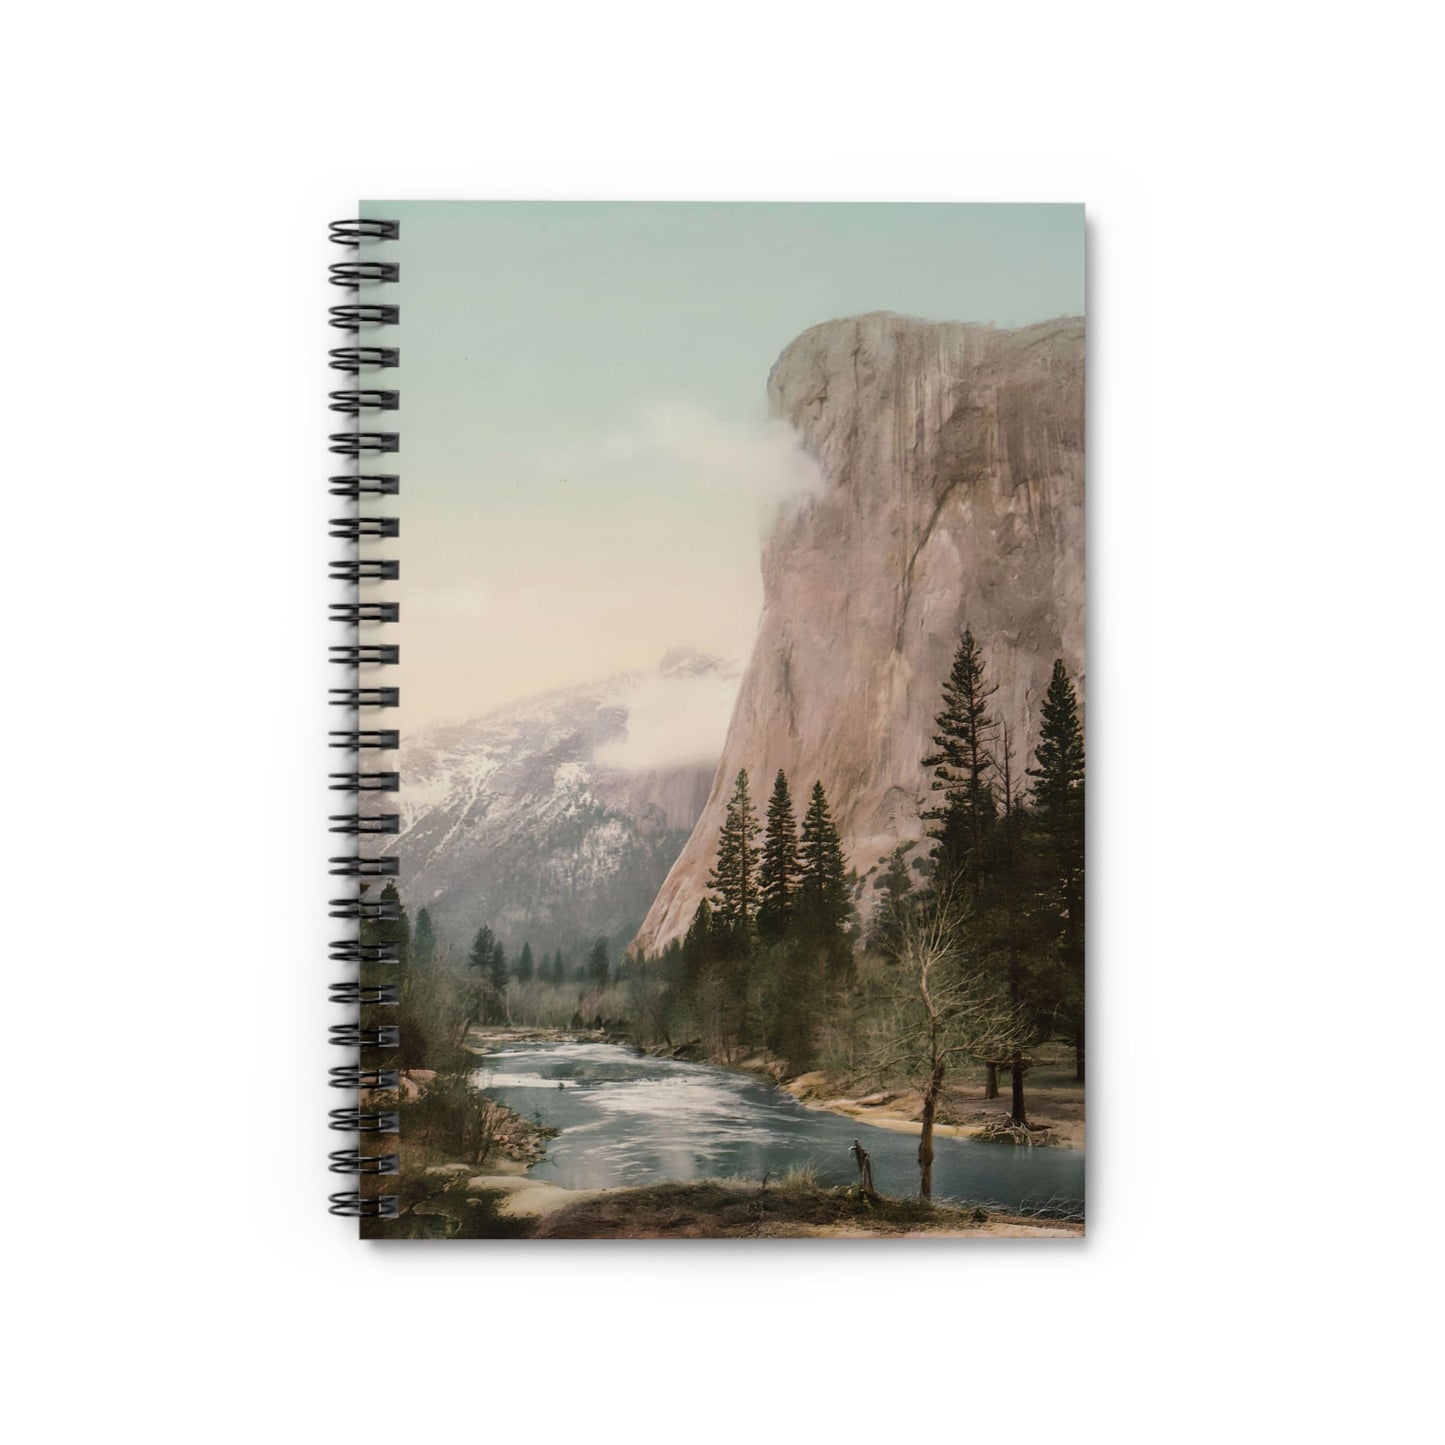 Antique National Park Notebook with El Capitan Yosemite cover, ideal for journals and planners, showcasing vintage Yosemite park art.